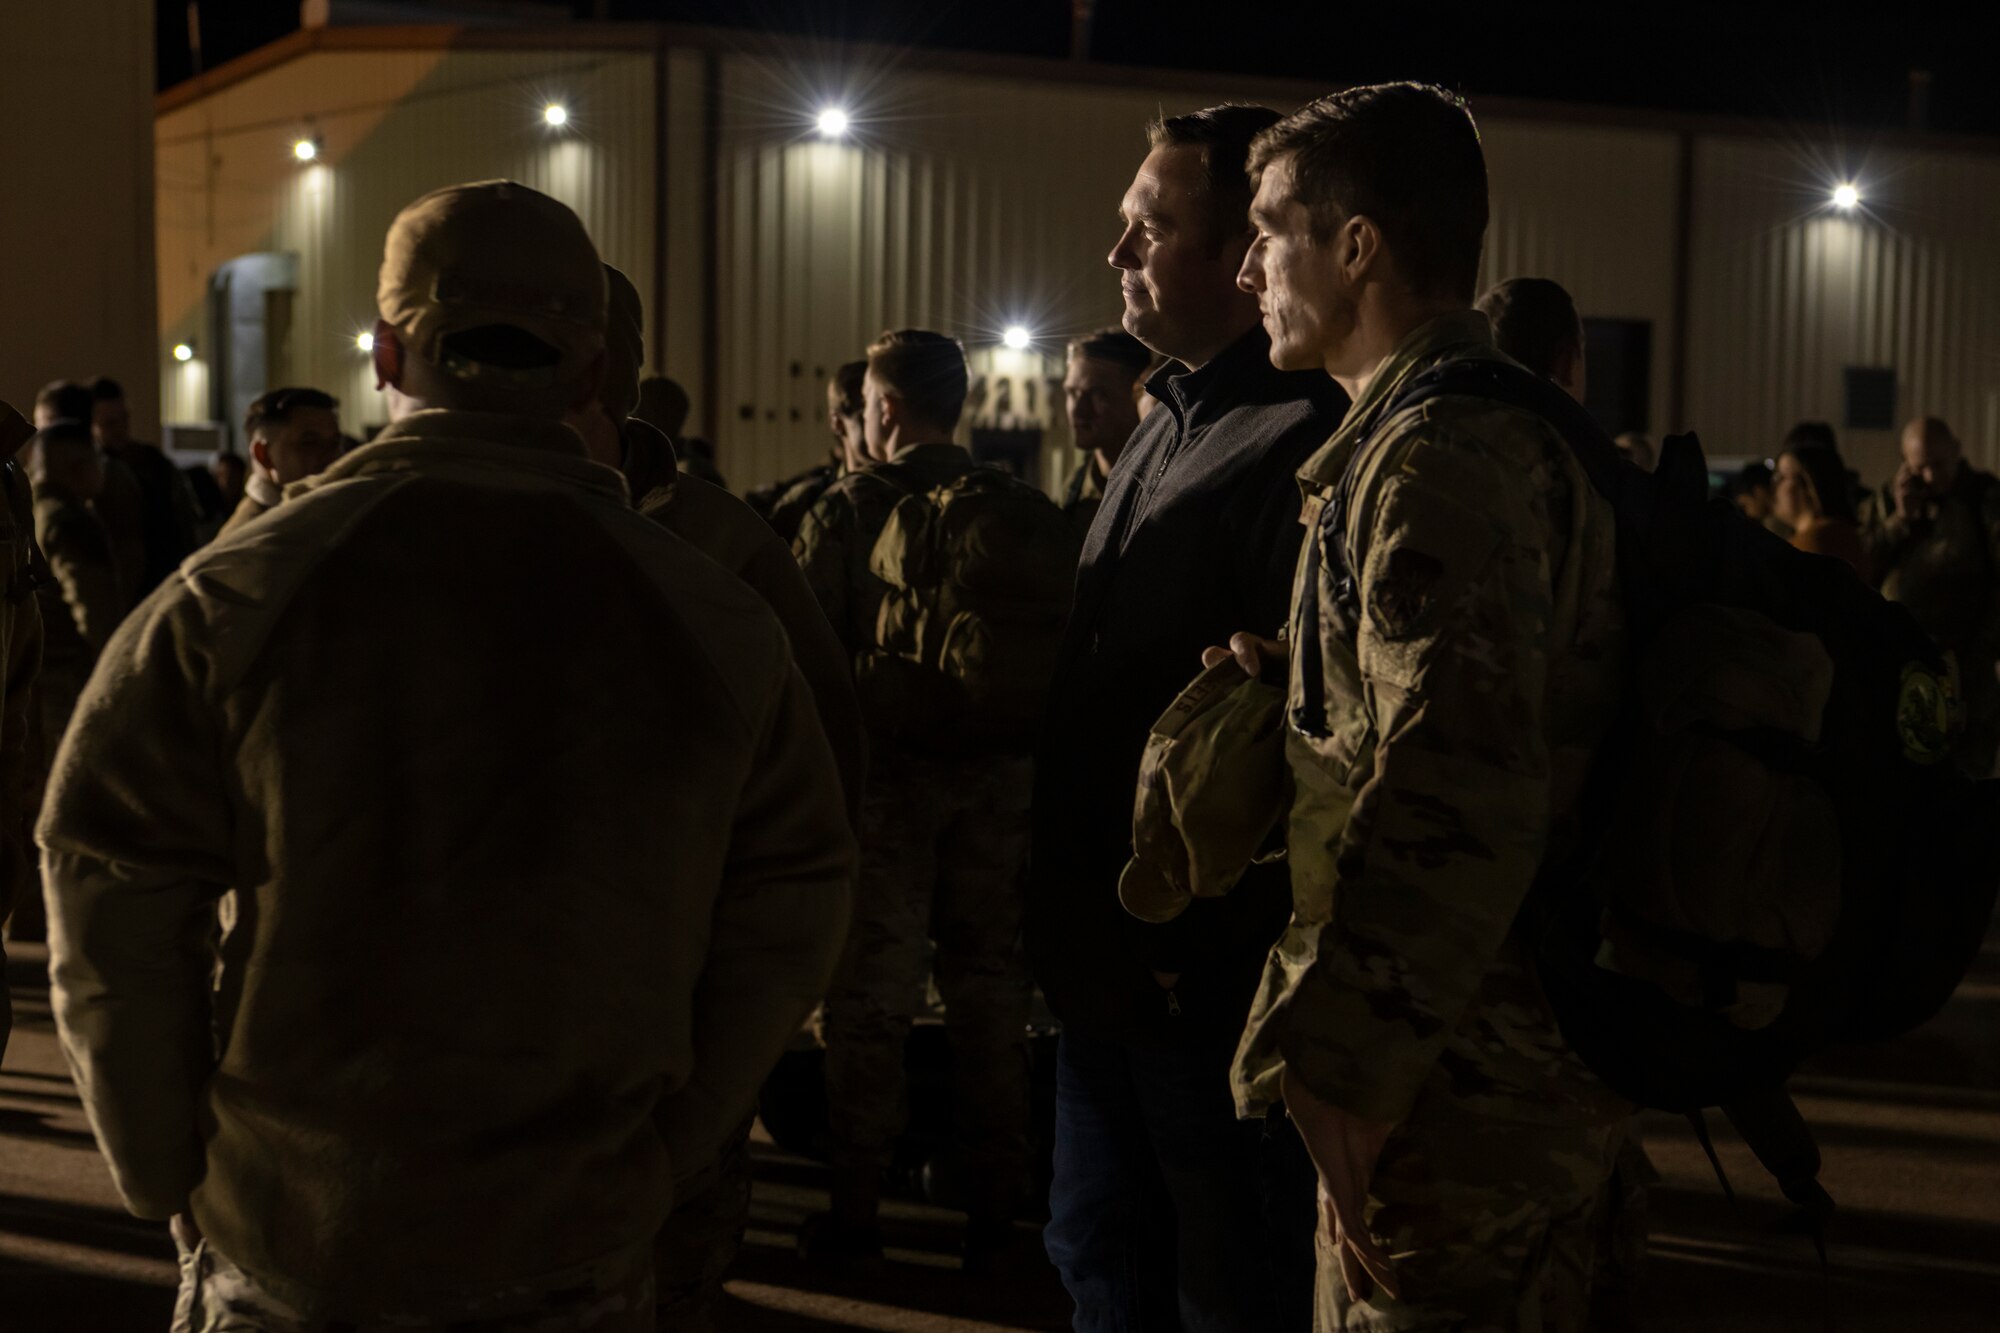 Airmen assigned to the 7the Bomb Wing wait for luggage with families after their return to Dyess Air Force Base, Texas, Nov. 18, 2021 from a Bomber Task Force Europe deployment.